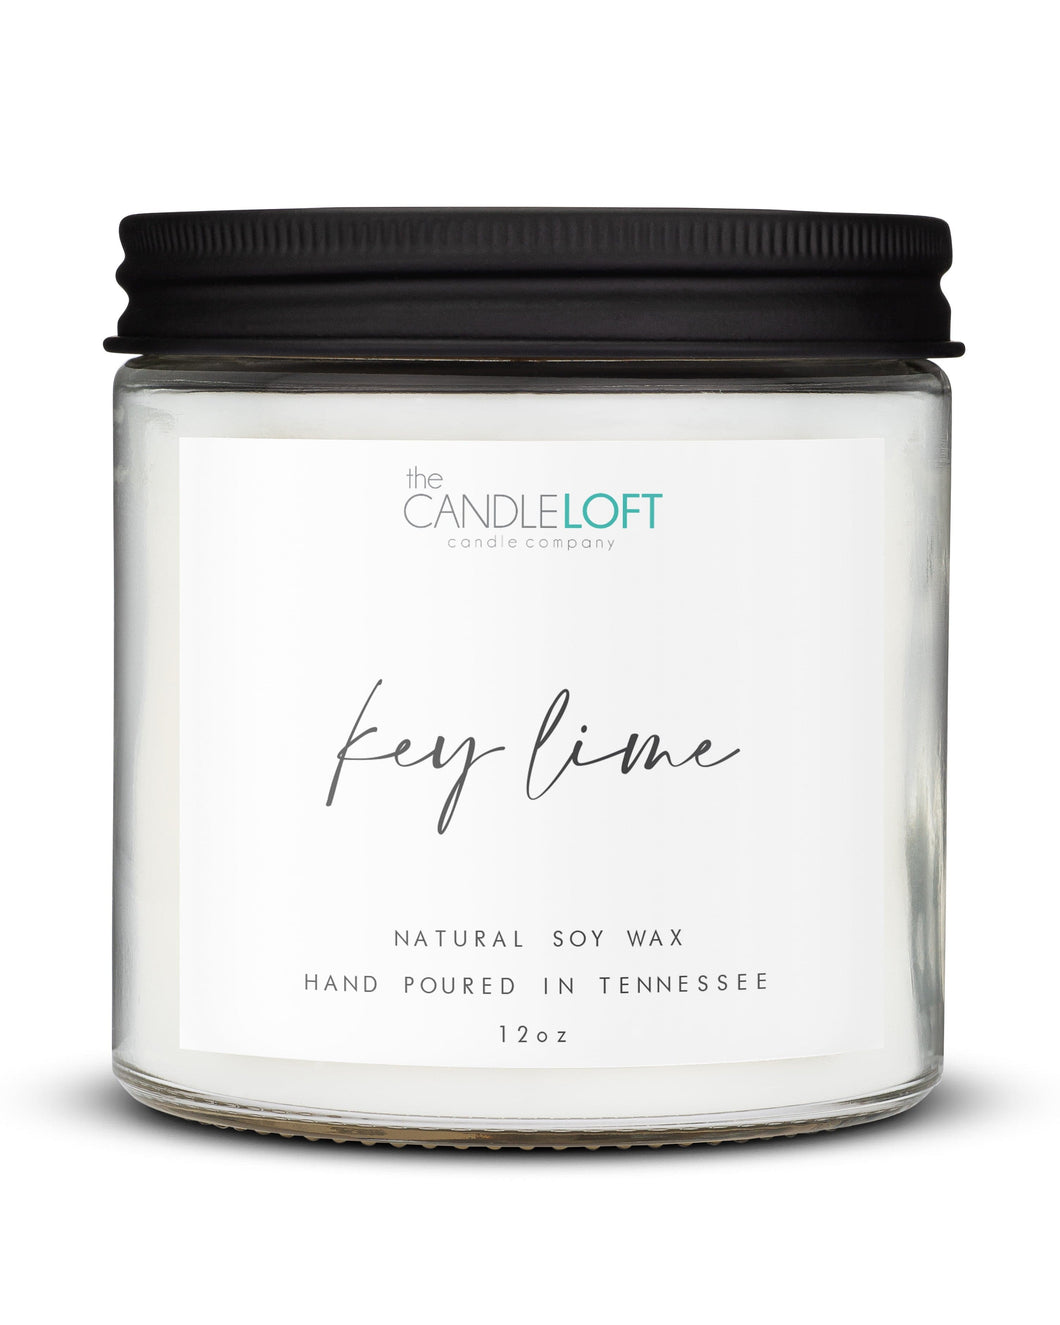 The Candle Loft Candles Signature 12oz Key Lime Candle